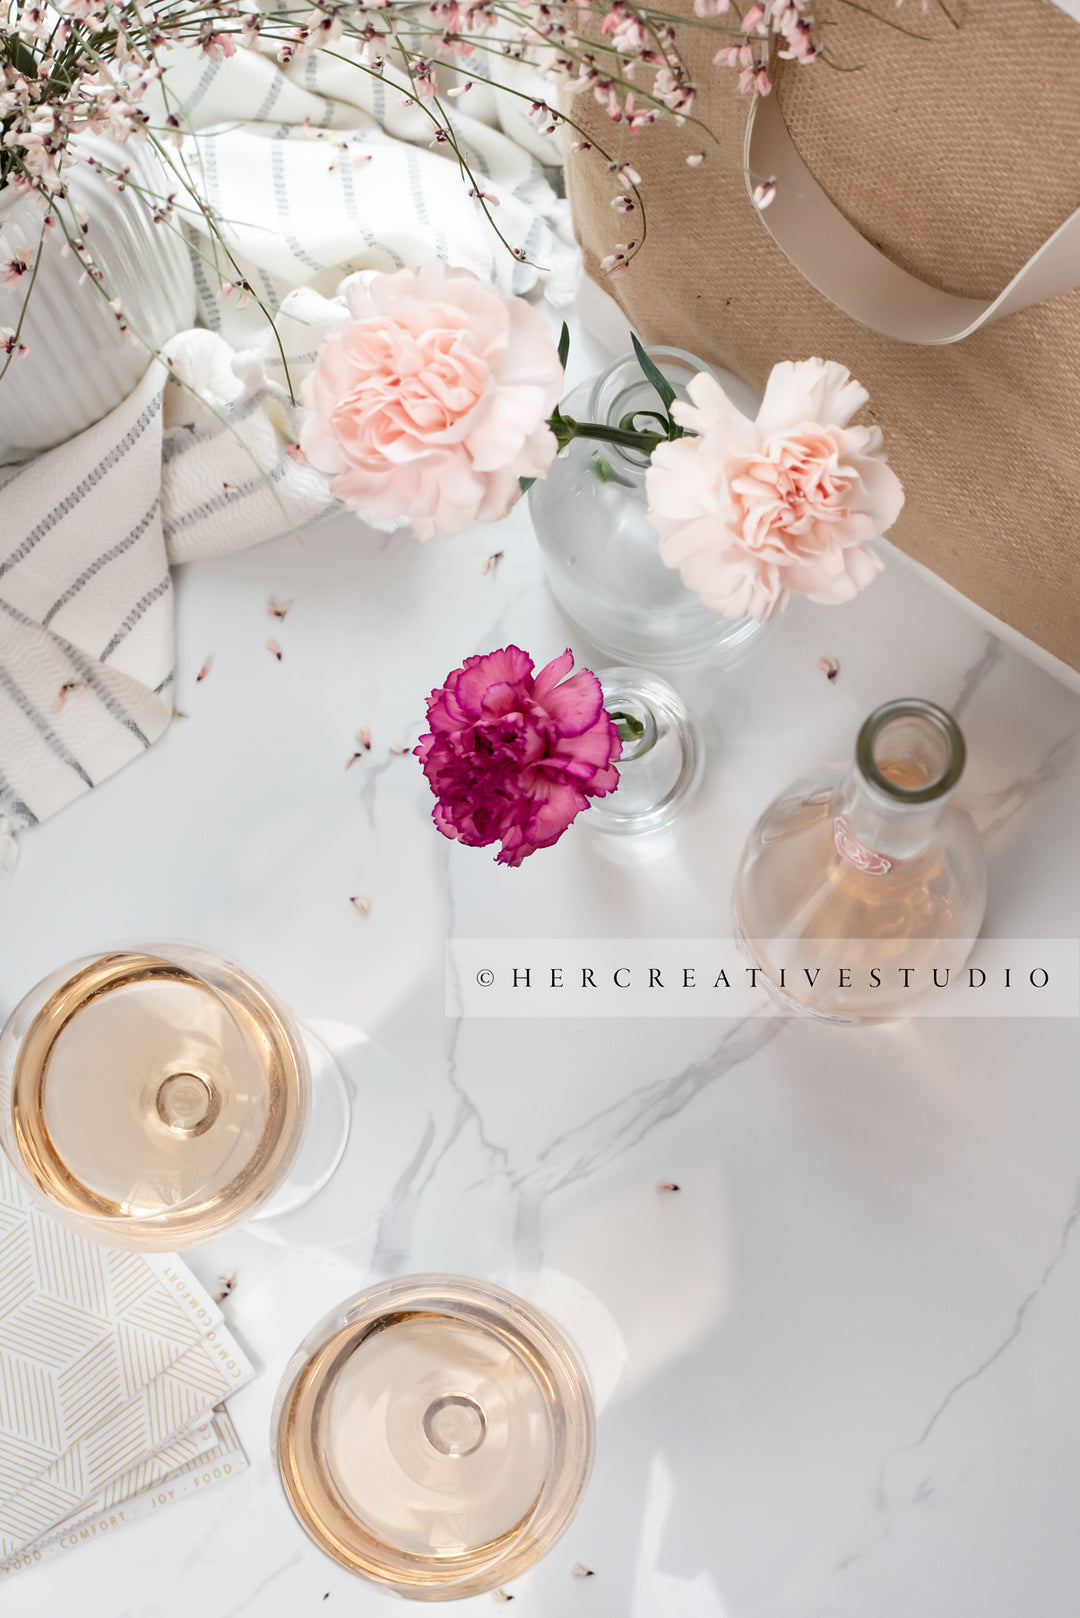 Glasses of Wine and Carnations on Marble, Styled Image